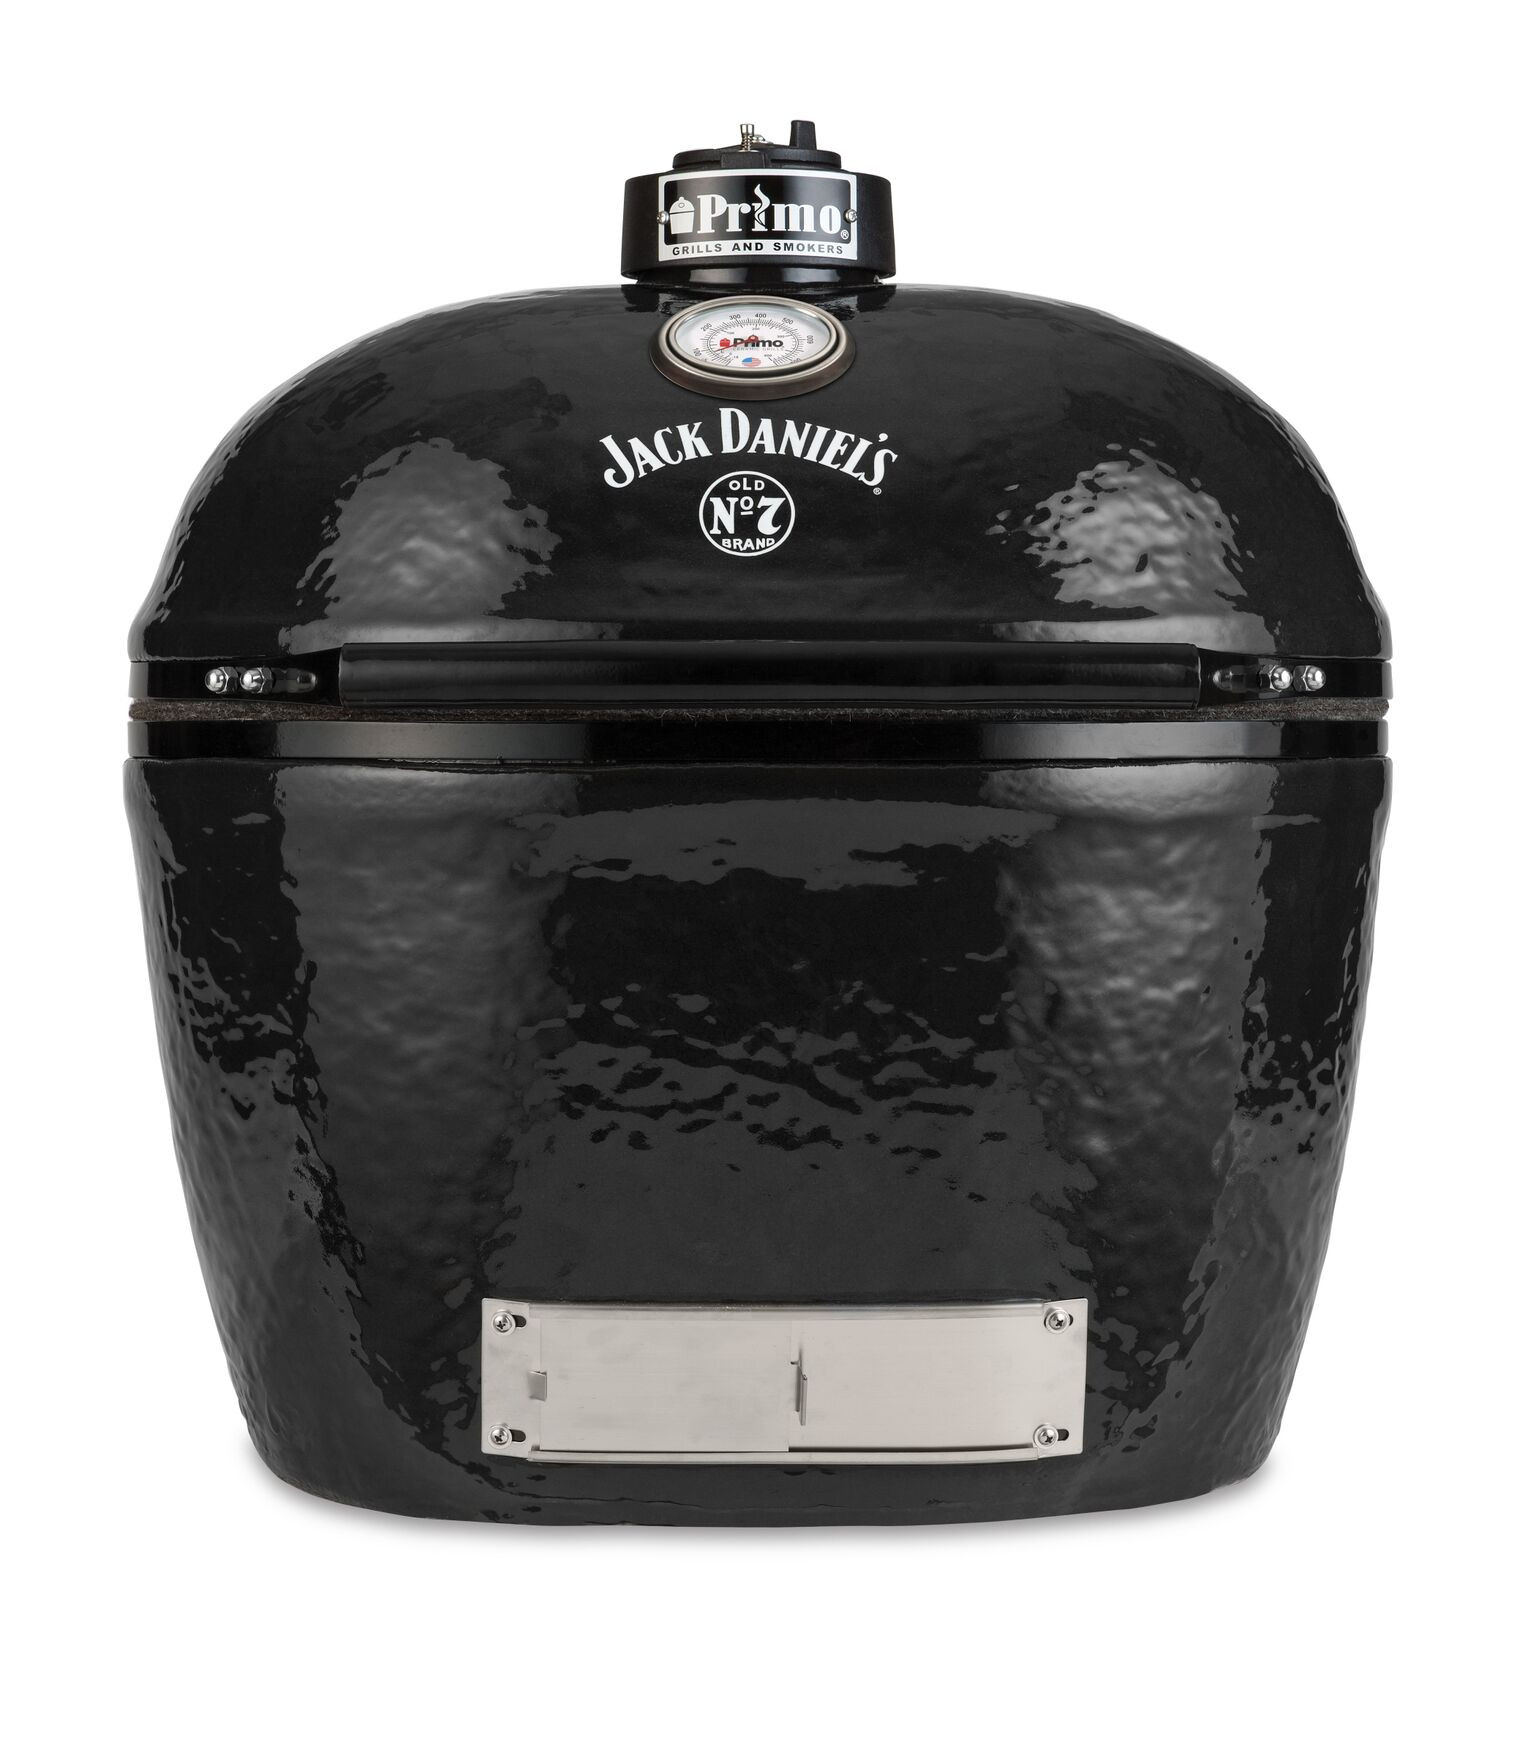 Primo Oval XL Jack Daniels (Limited edition)